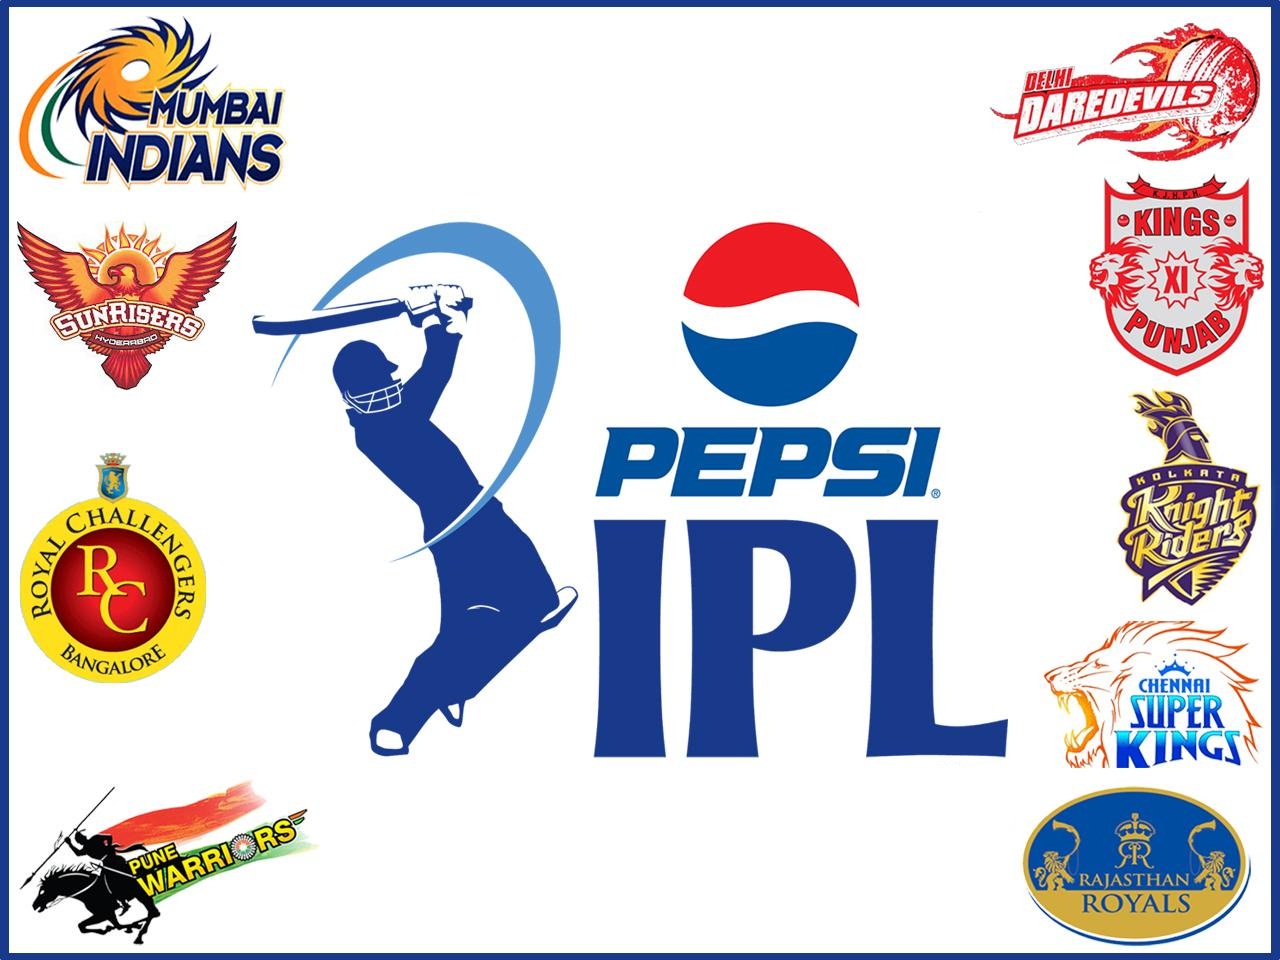 IPL 2015 has contributed $182 million in GDP